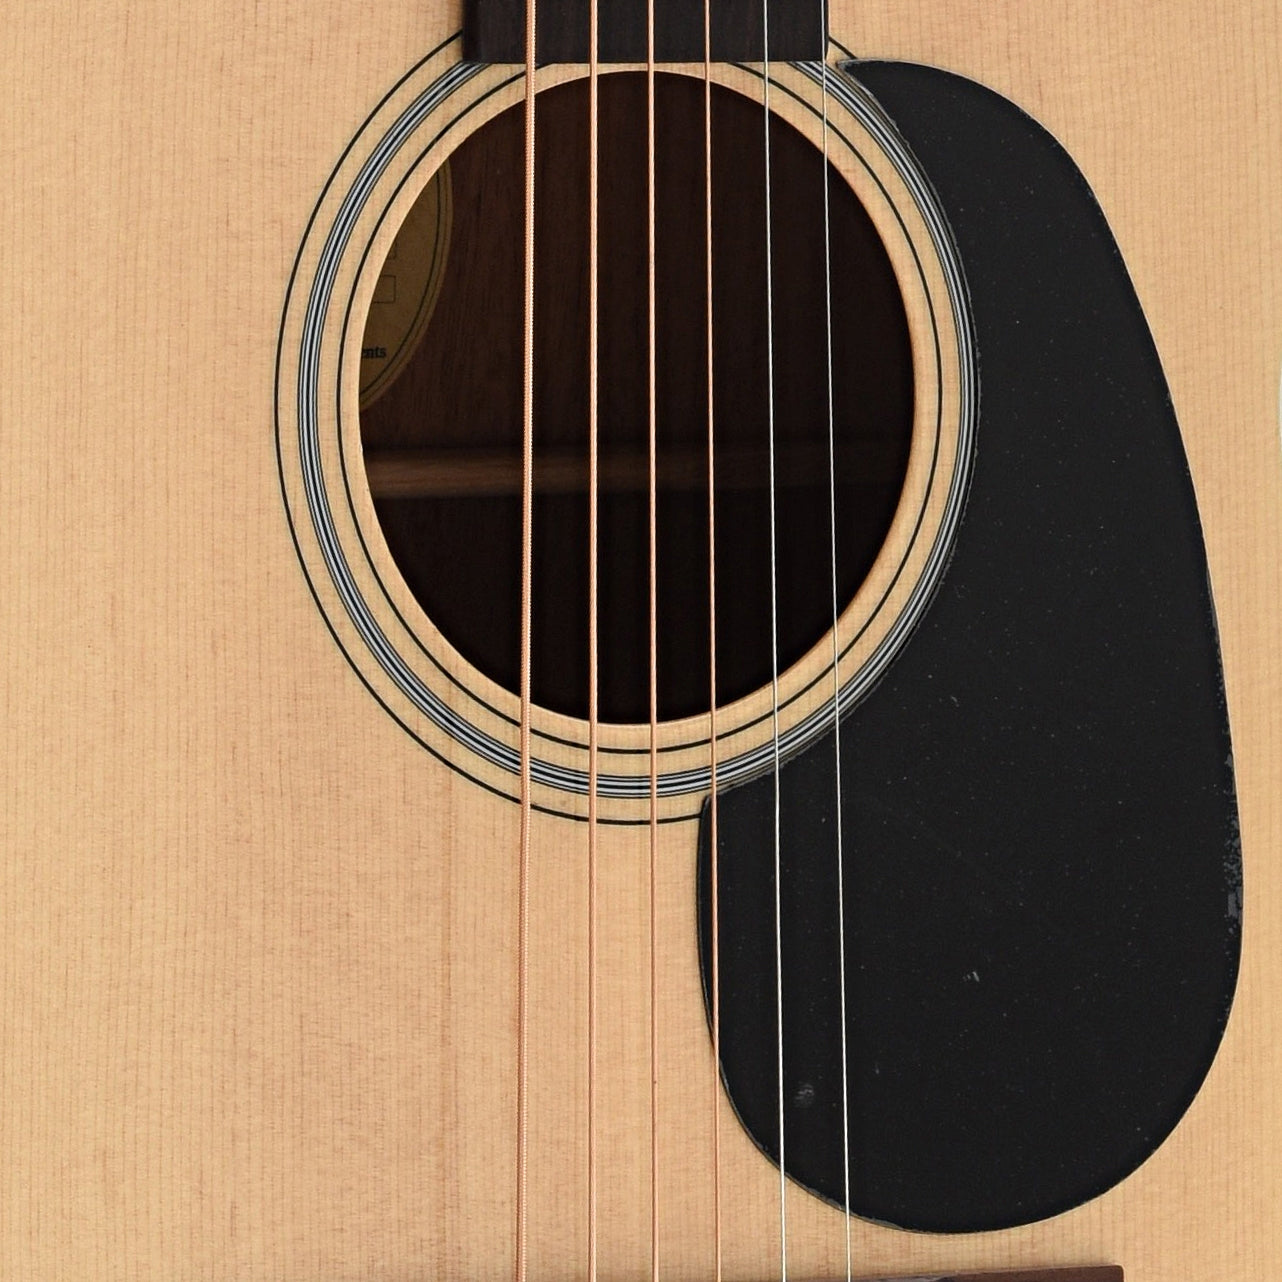 Image 4 of Blueridge Contemporary Series BR-41 "Baby" Acoustic Guitar - SKU# BR41 : Product Type Flat-top Guitars : Elderly Instruments